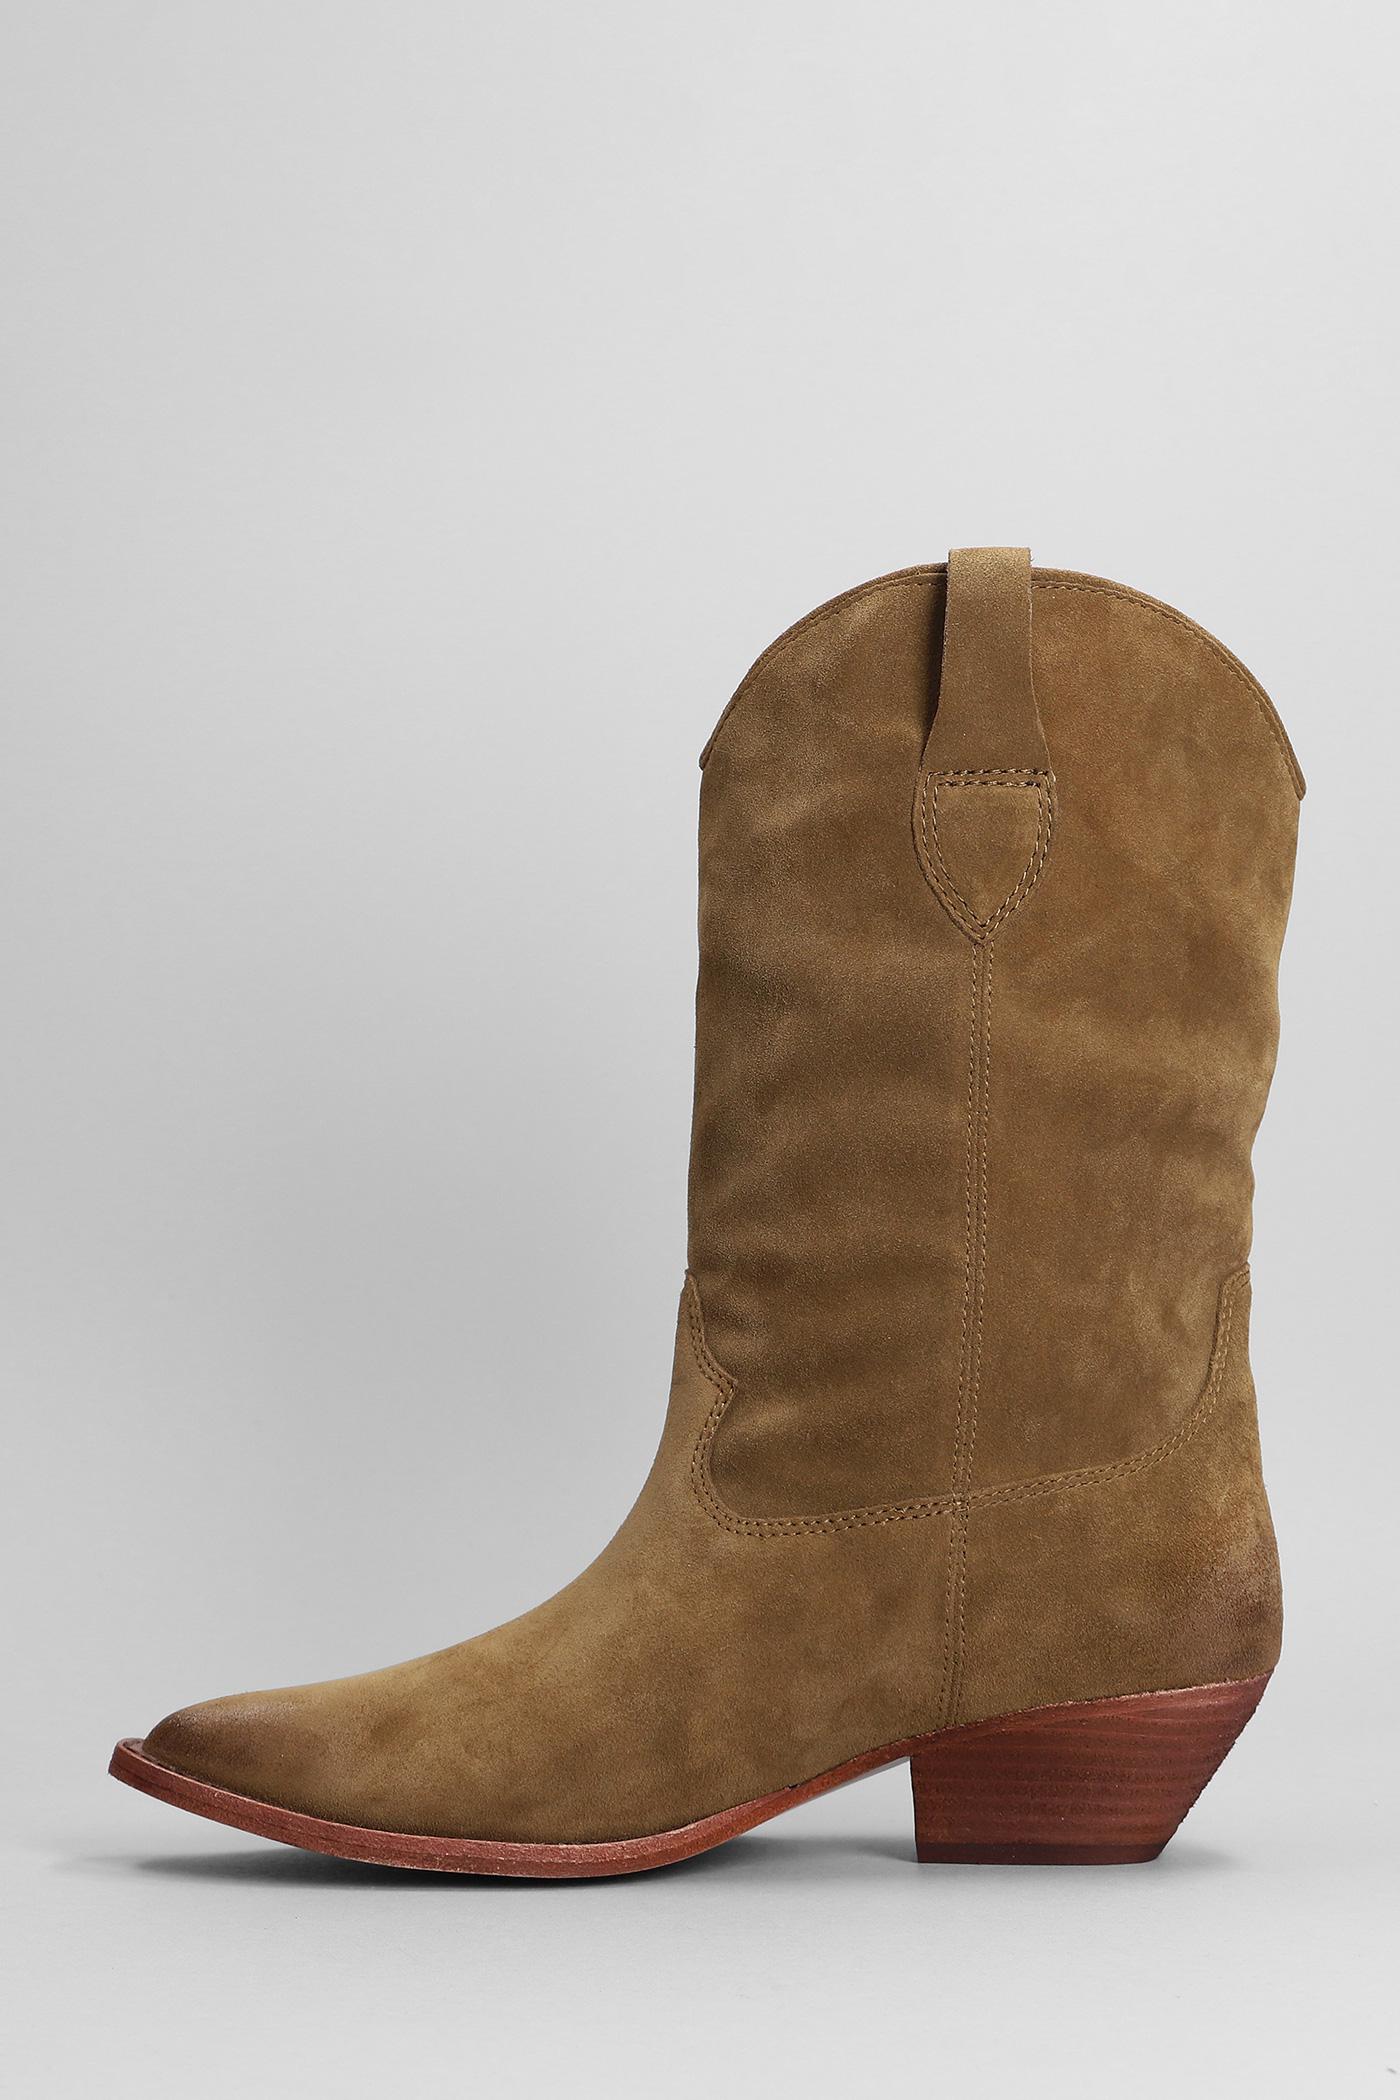 Ash Dalton Texan Ankle Boots In Brown Suede | Lyst